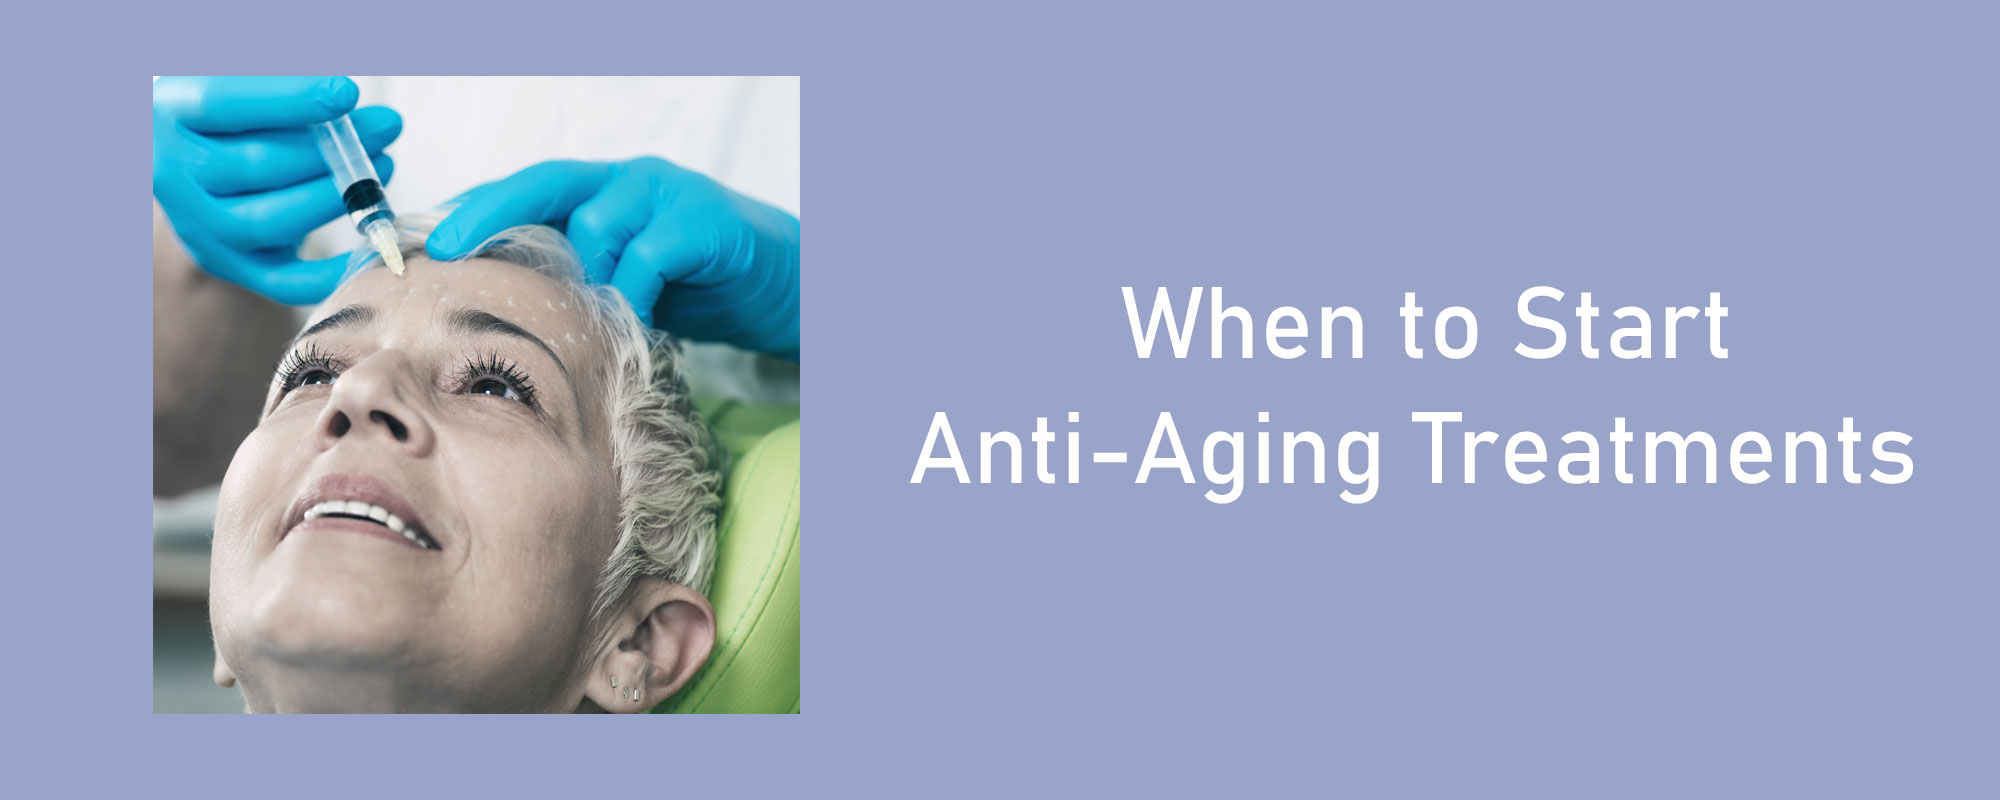 When to Start Anti-Aging Treatments - 1